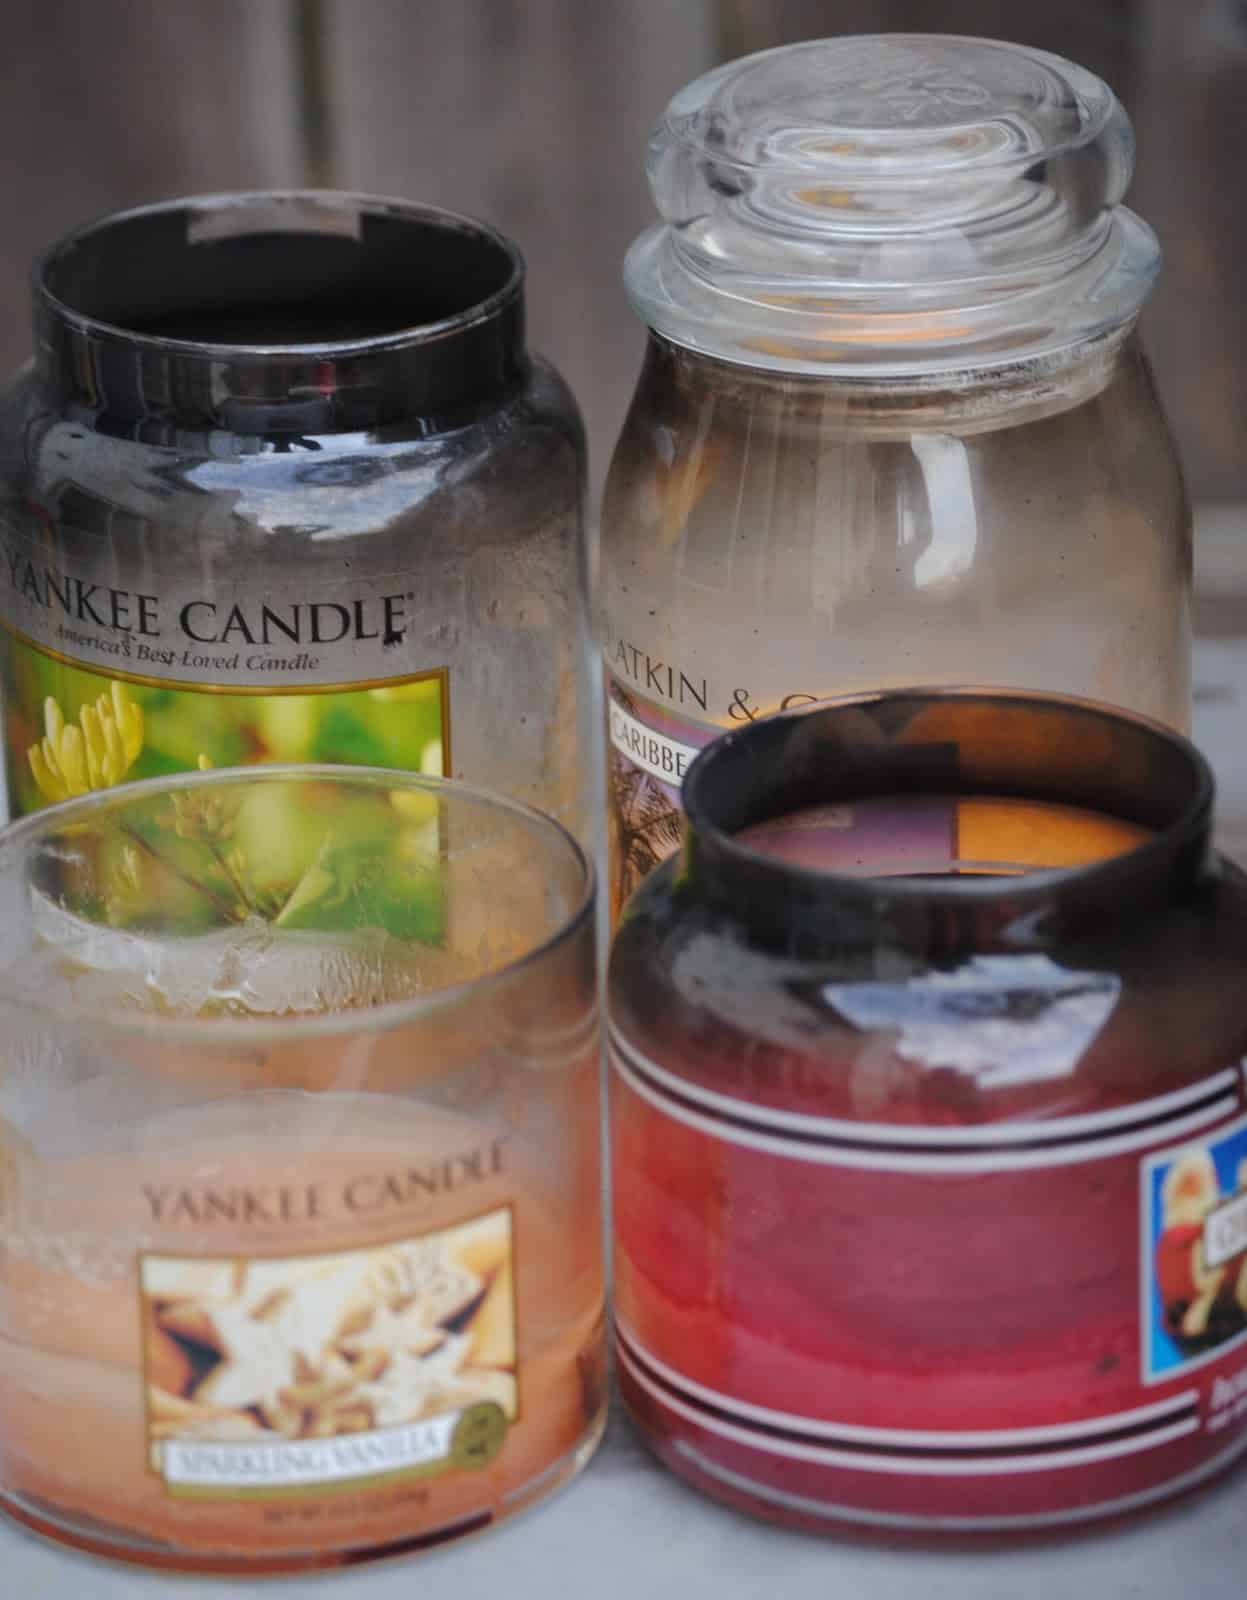 15 Creative Ideas On What To Do With Your Old Candle Jars and Wax